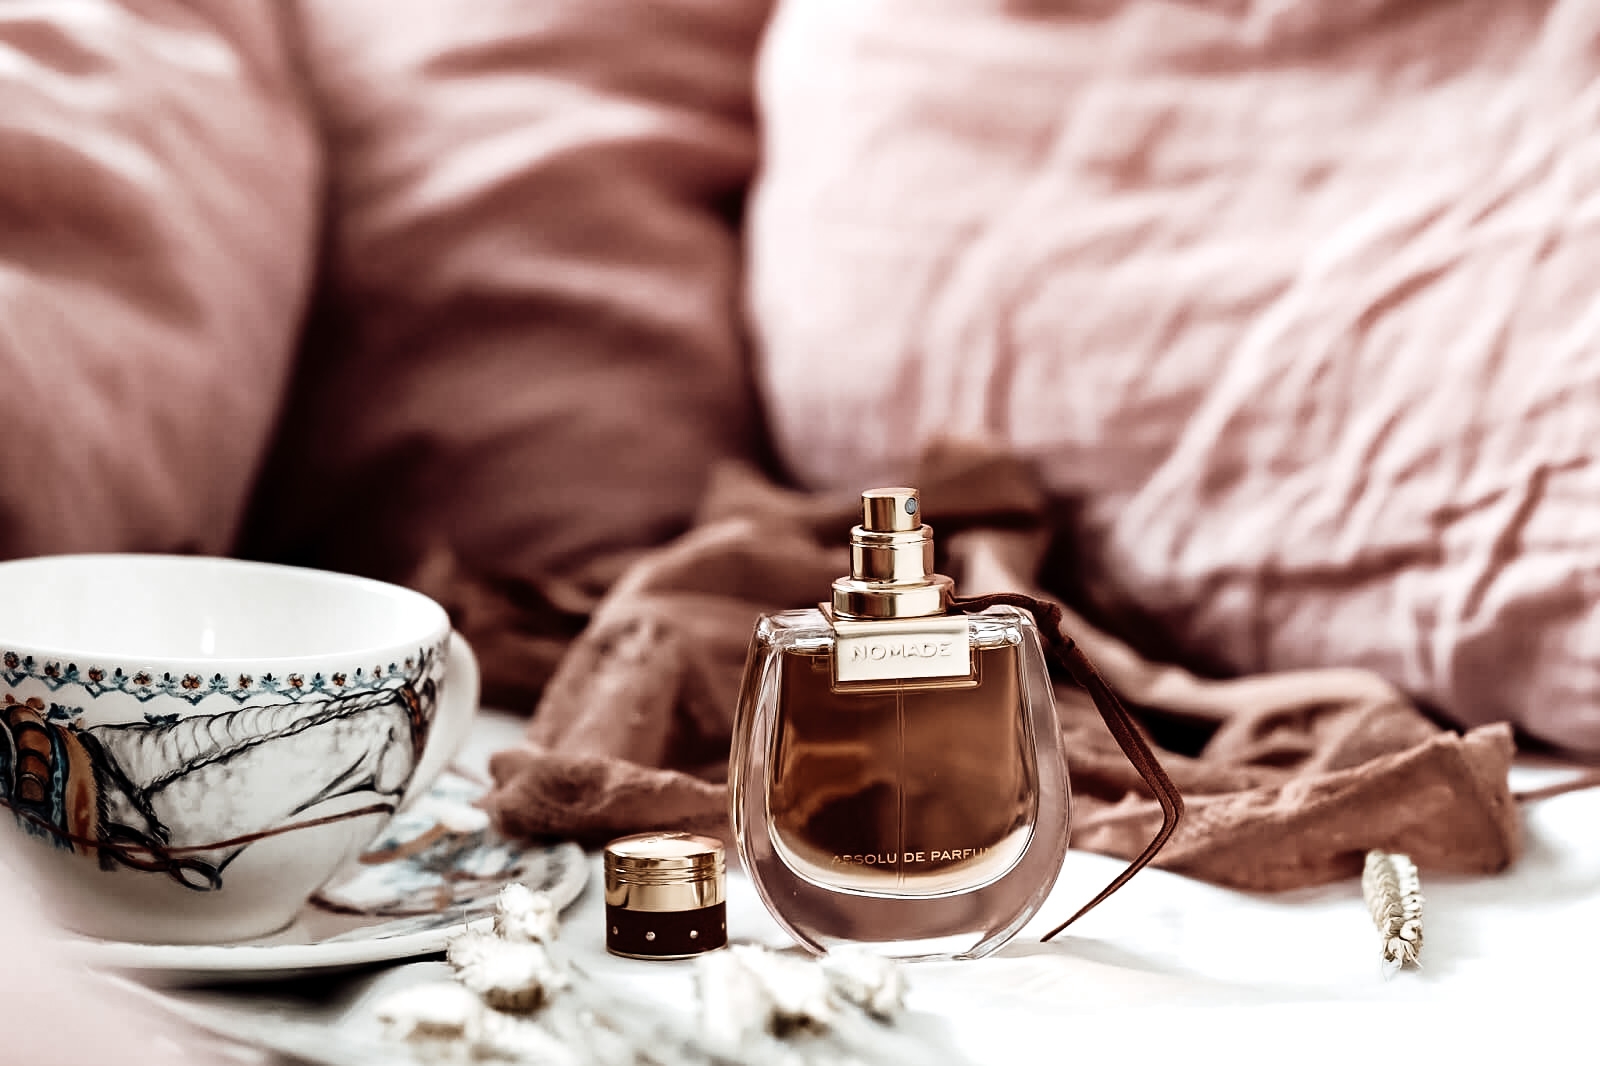 Top 15 Best Perfumes For Woman In 2021